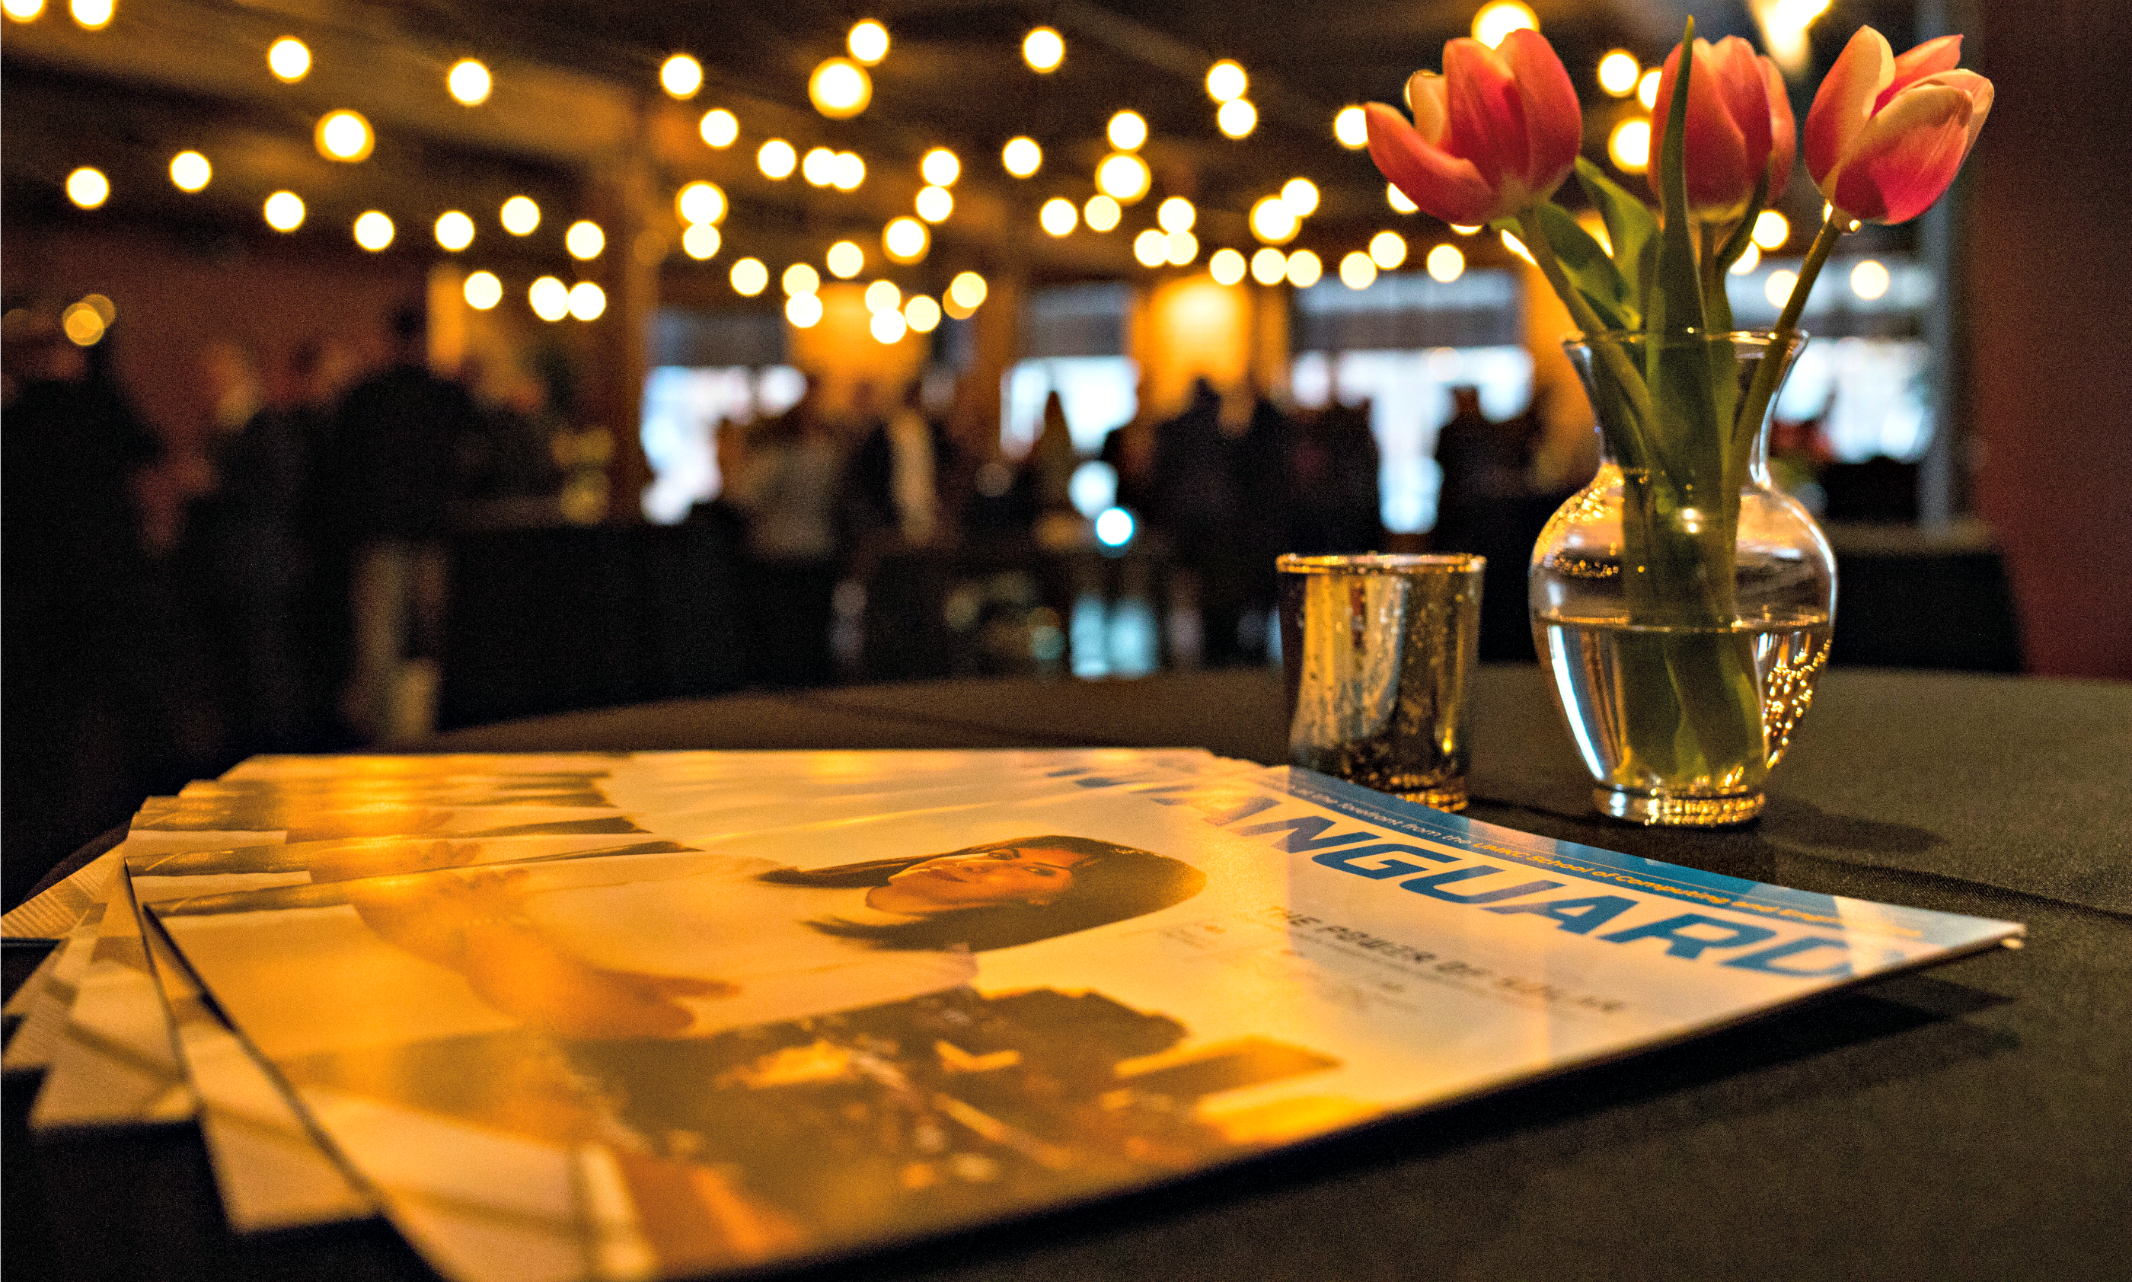 photo of Vanguard magazine on table with flowers